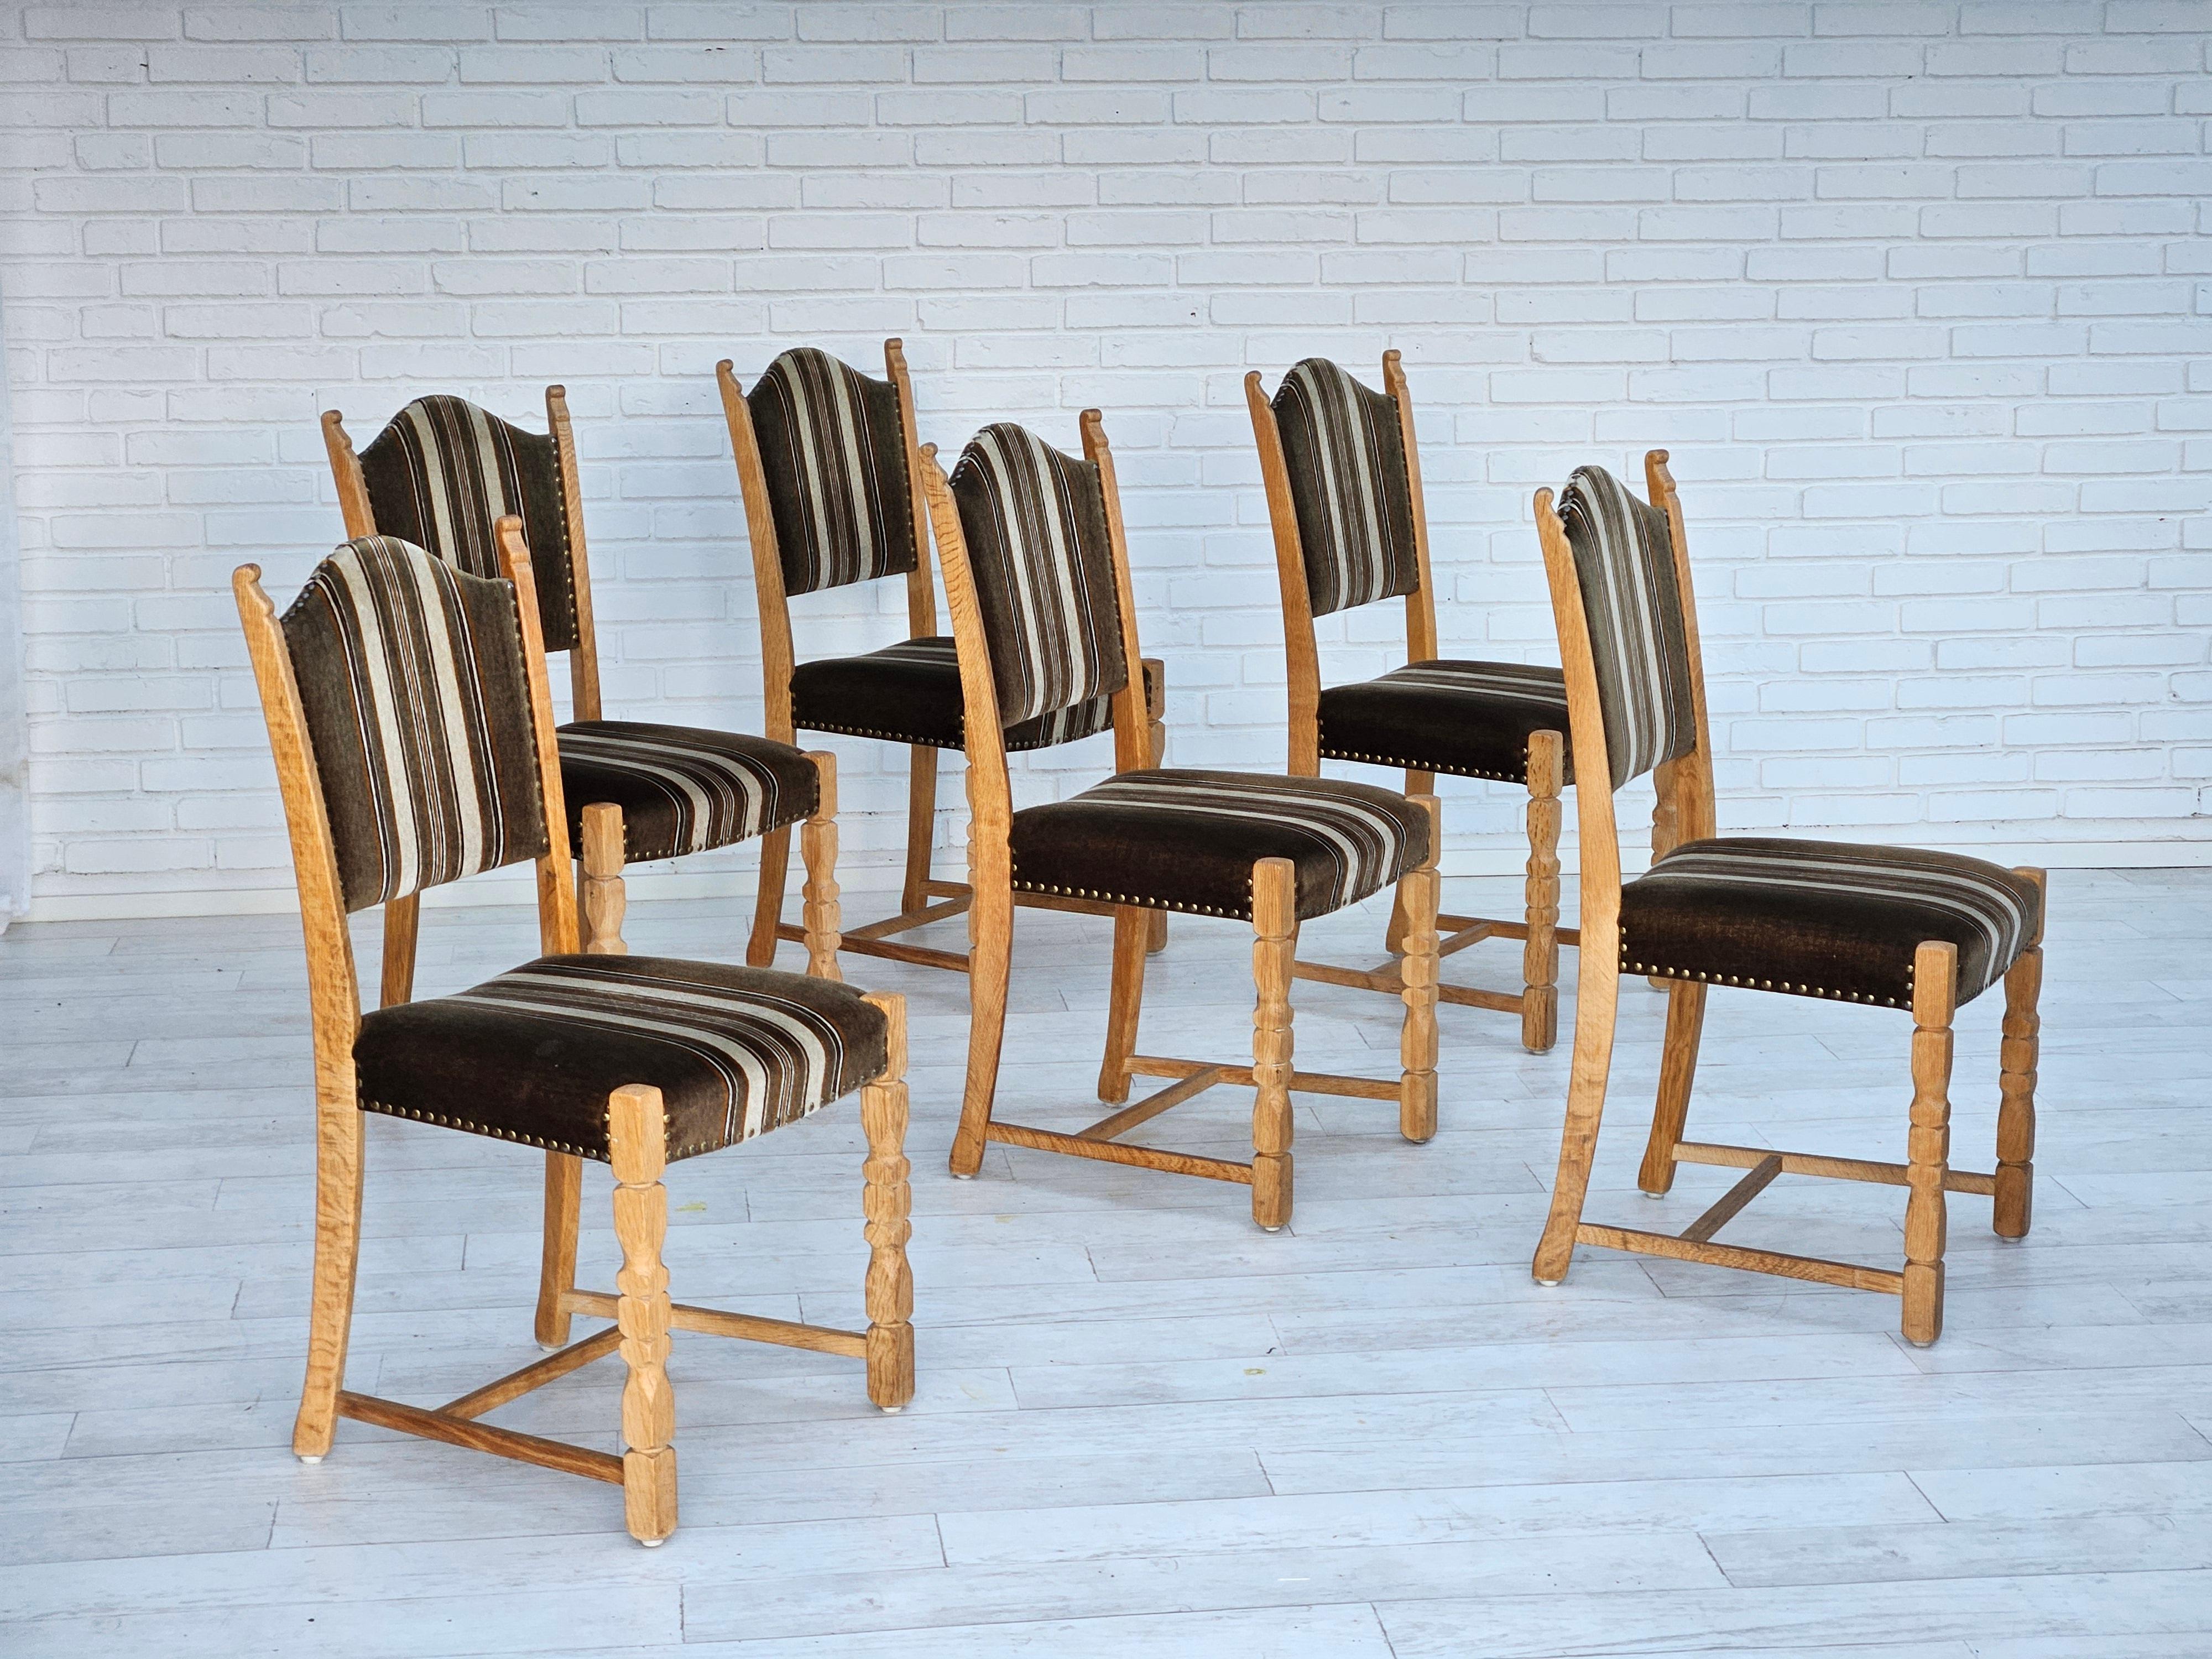 1970s, set of 6 pcs Danish dining chairs. Original very good condition: no smells and no stains. Furniture velour fabric, oak wood. Manufactured by Danish furniture manufacturer in about 1970s.